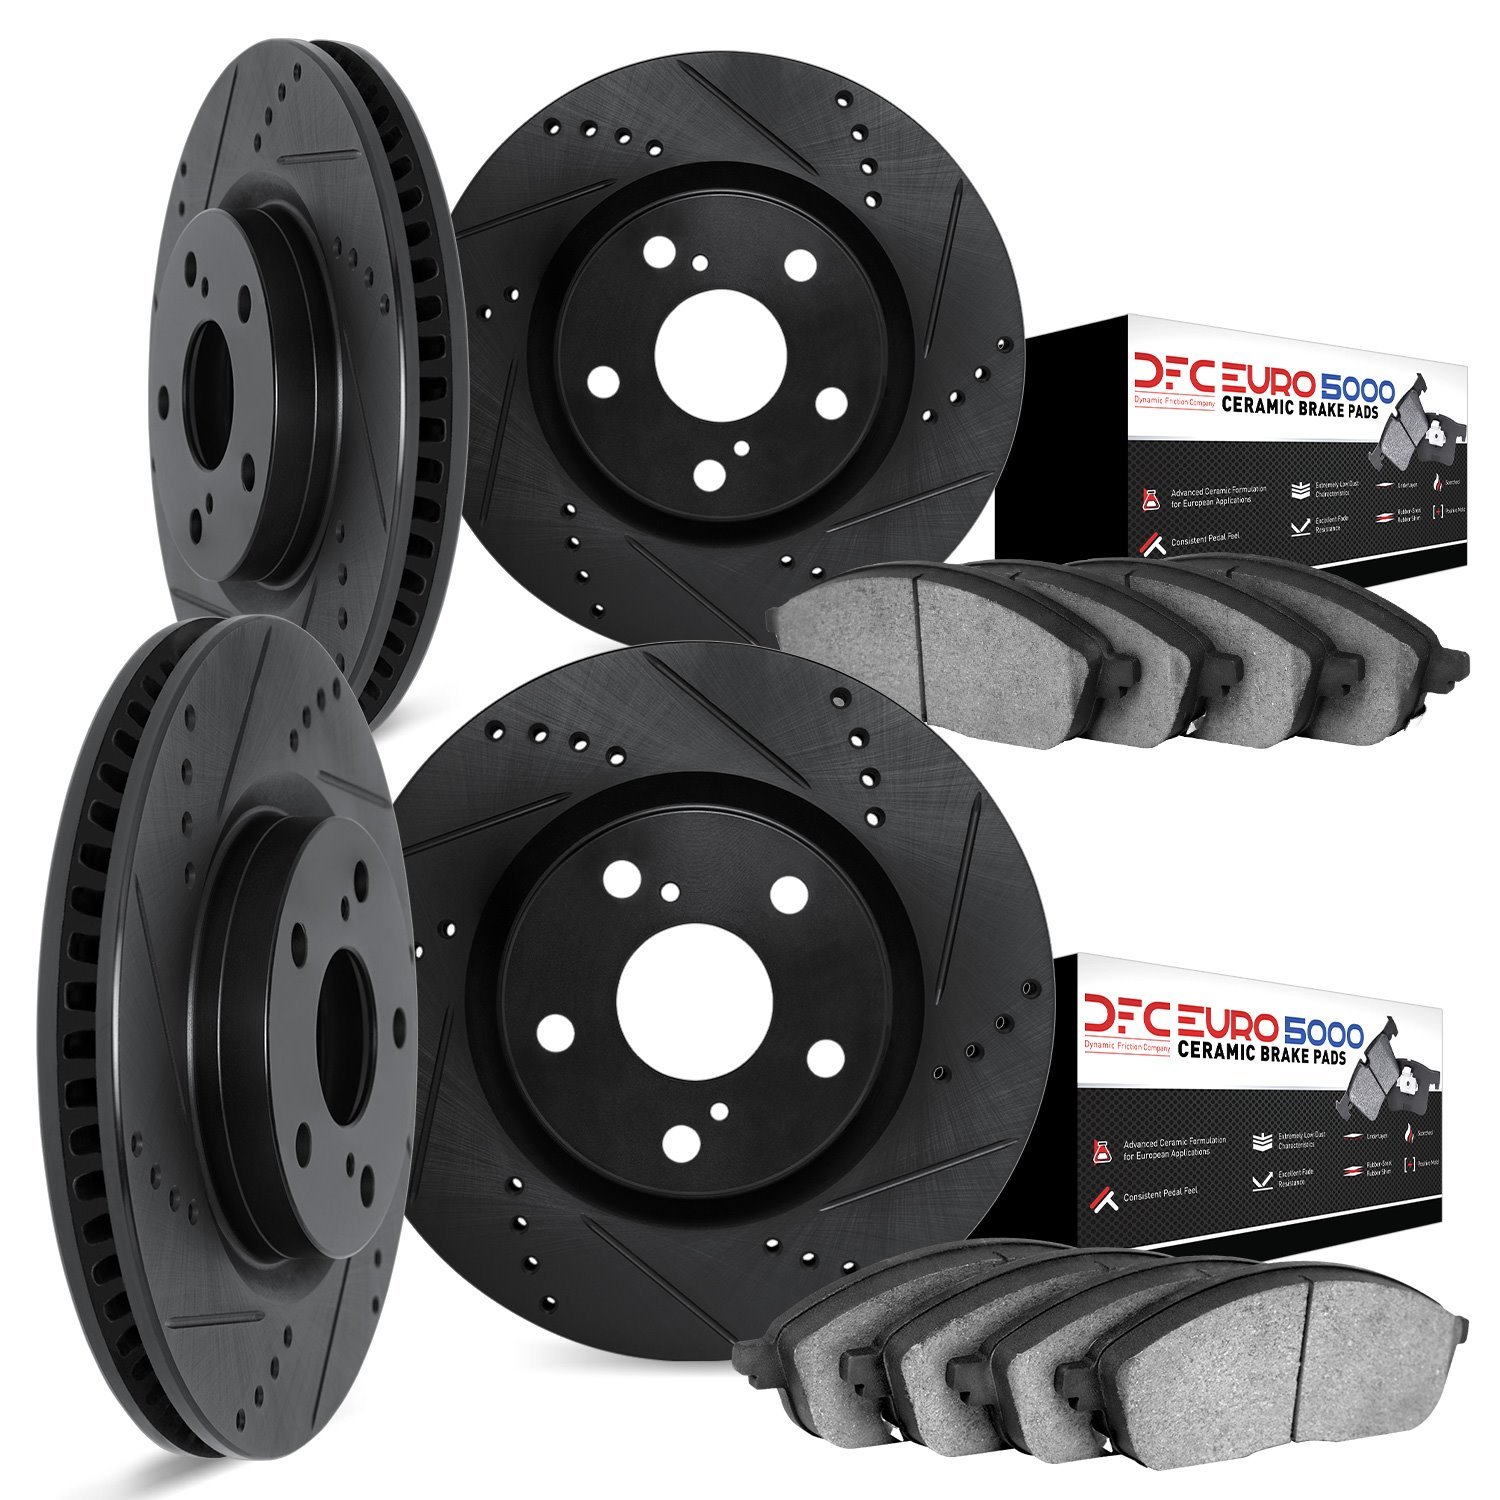 8604-02004 Drilled/Slotted Brake Rotors w/5000 Euro Ceramic Brake Pads Kit [Black], 1987-1995 Porsche, Position: Front and Rear